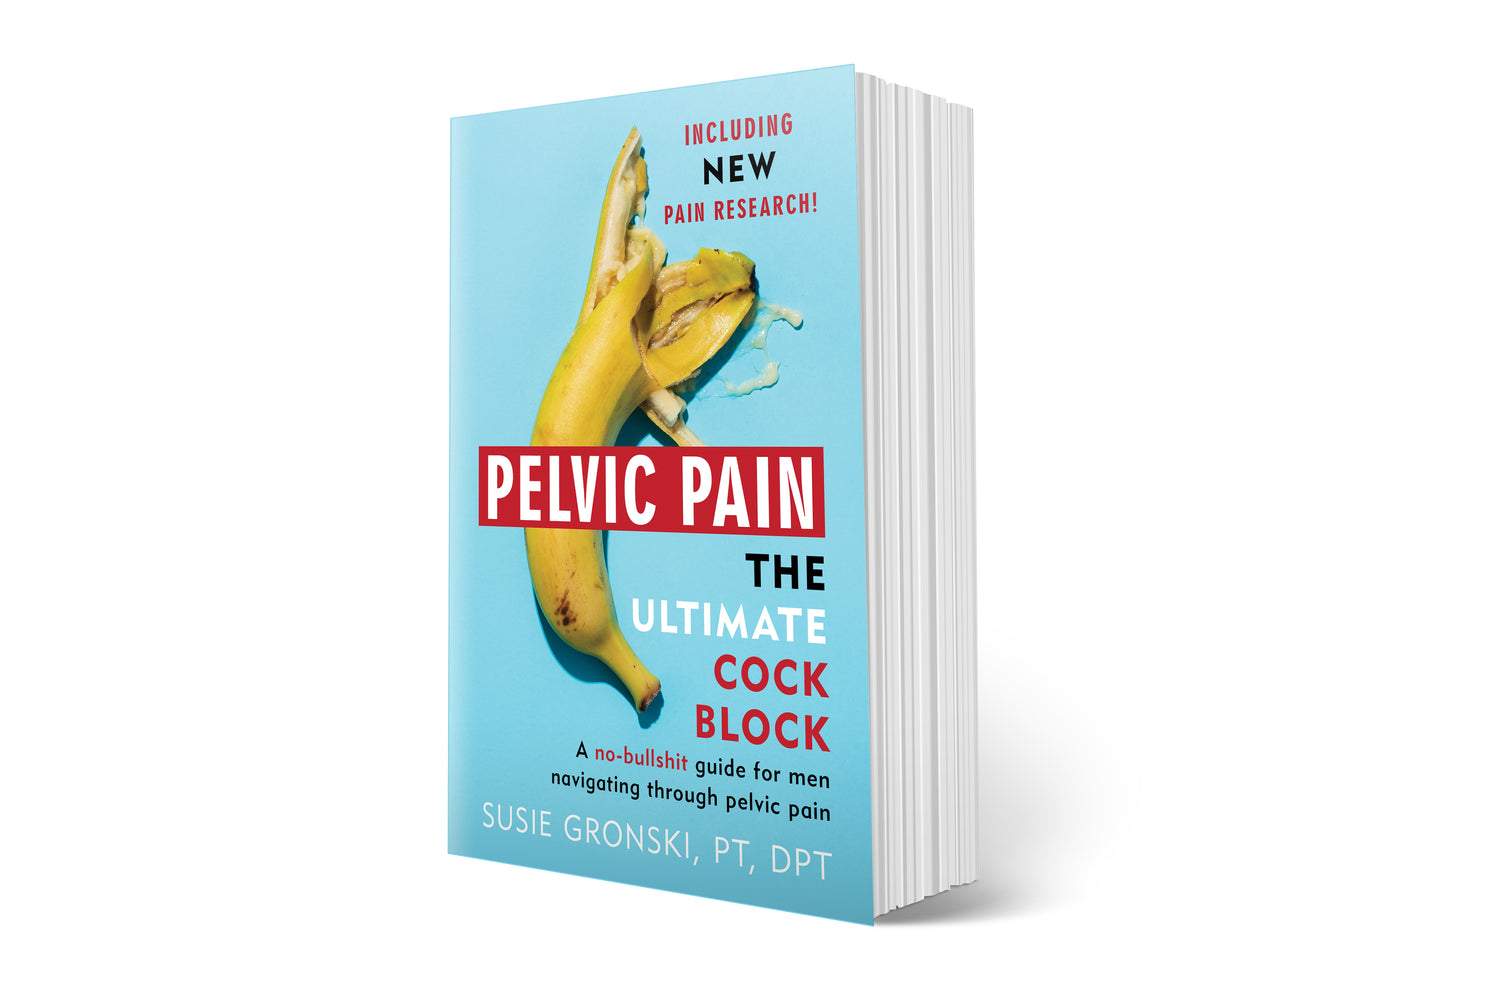 PELVIC PAIN THE ULTIMATE COCK BLOCK BY DR SUSIE GRONSKI